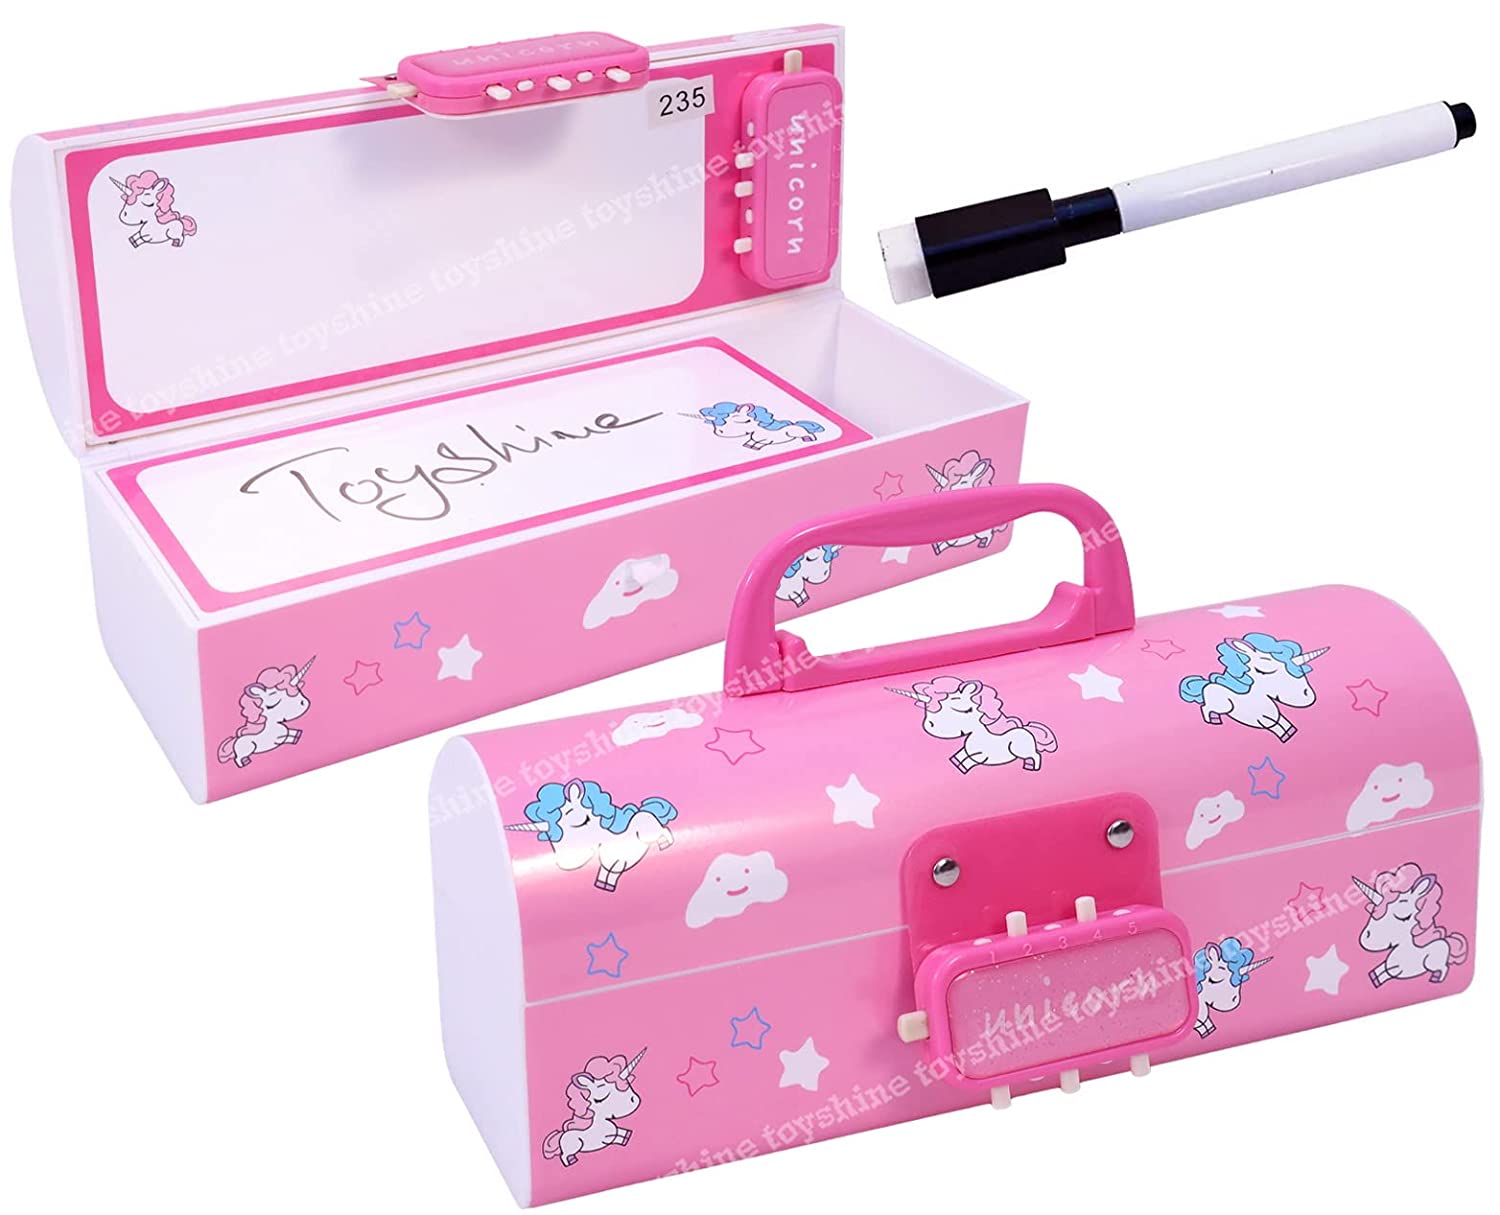 Buy Kids Cute Pencil Box & Pouch Online at Best Price in India